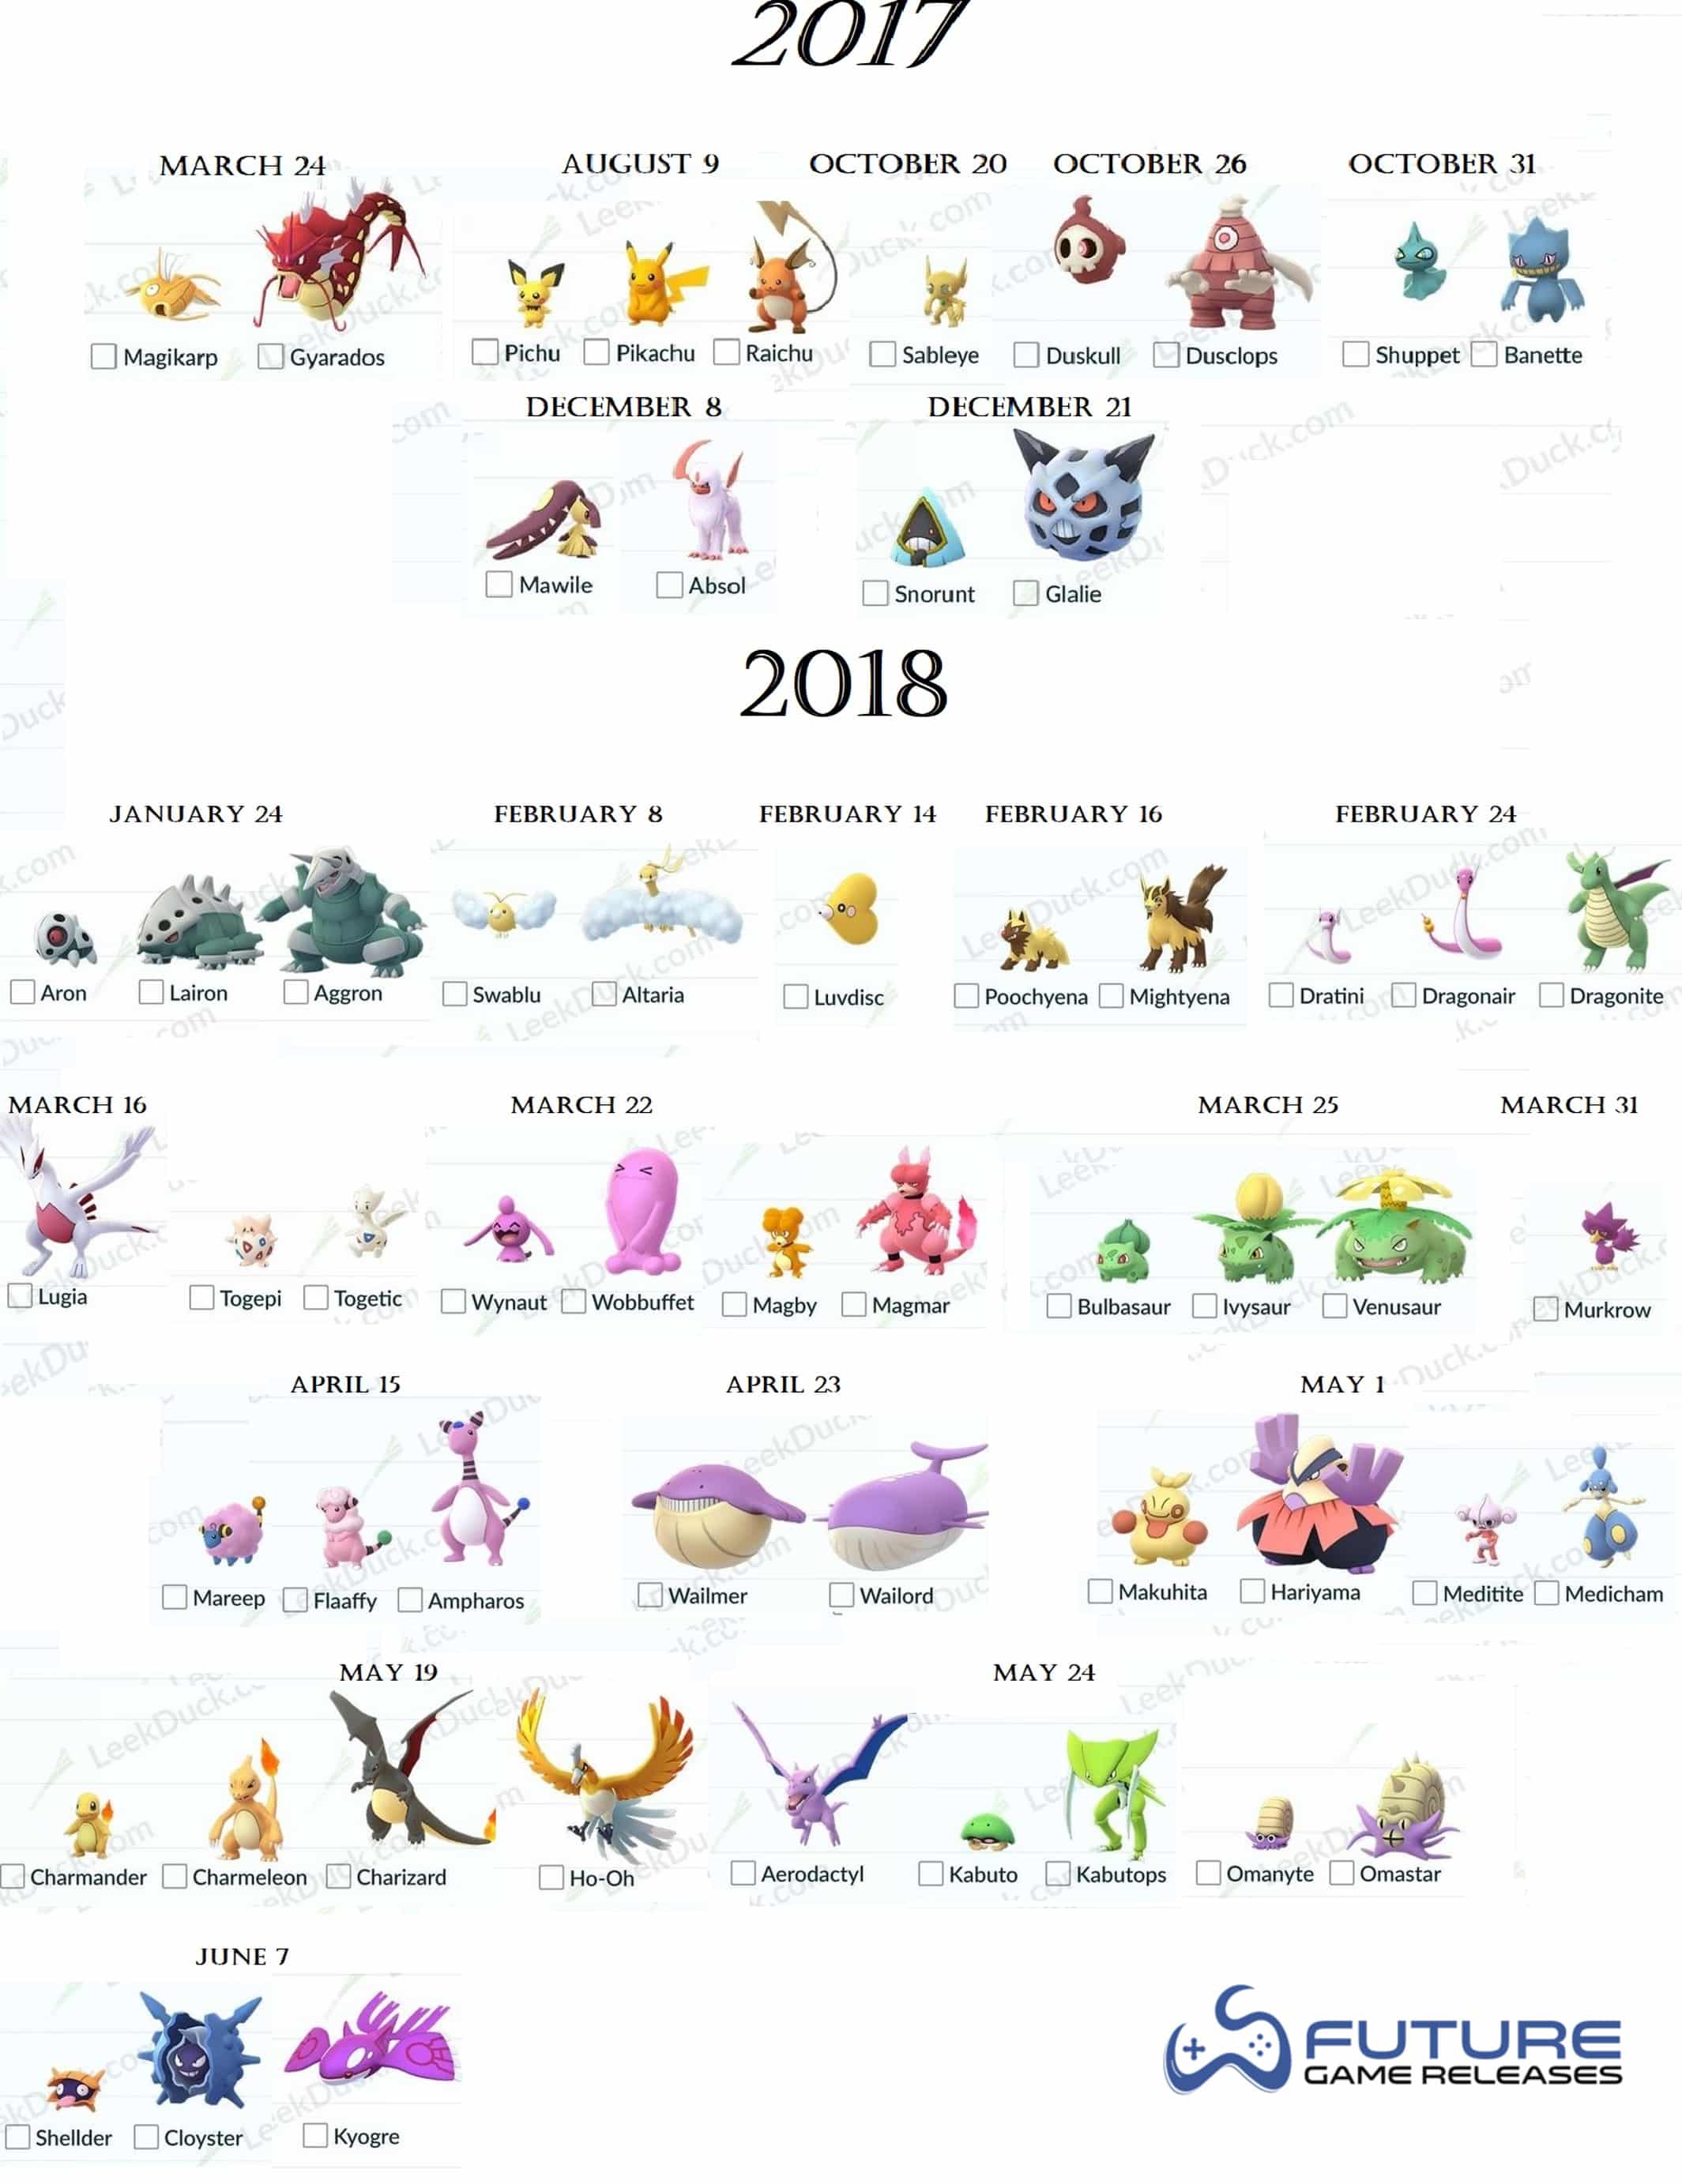 new-updated-list-of-all-shiny-pokemon-in-pokemon-go-dates-included